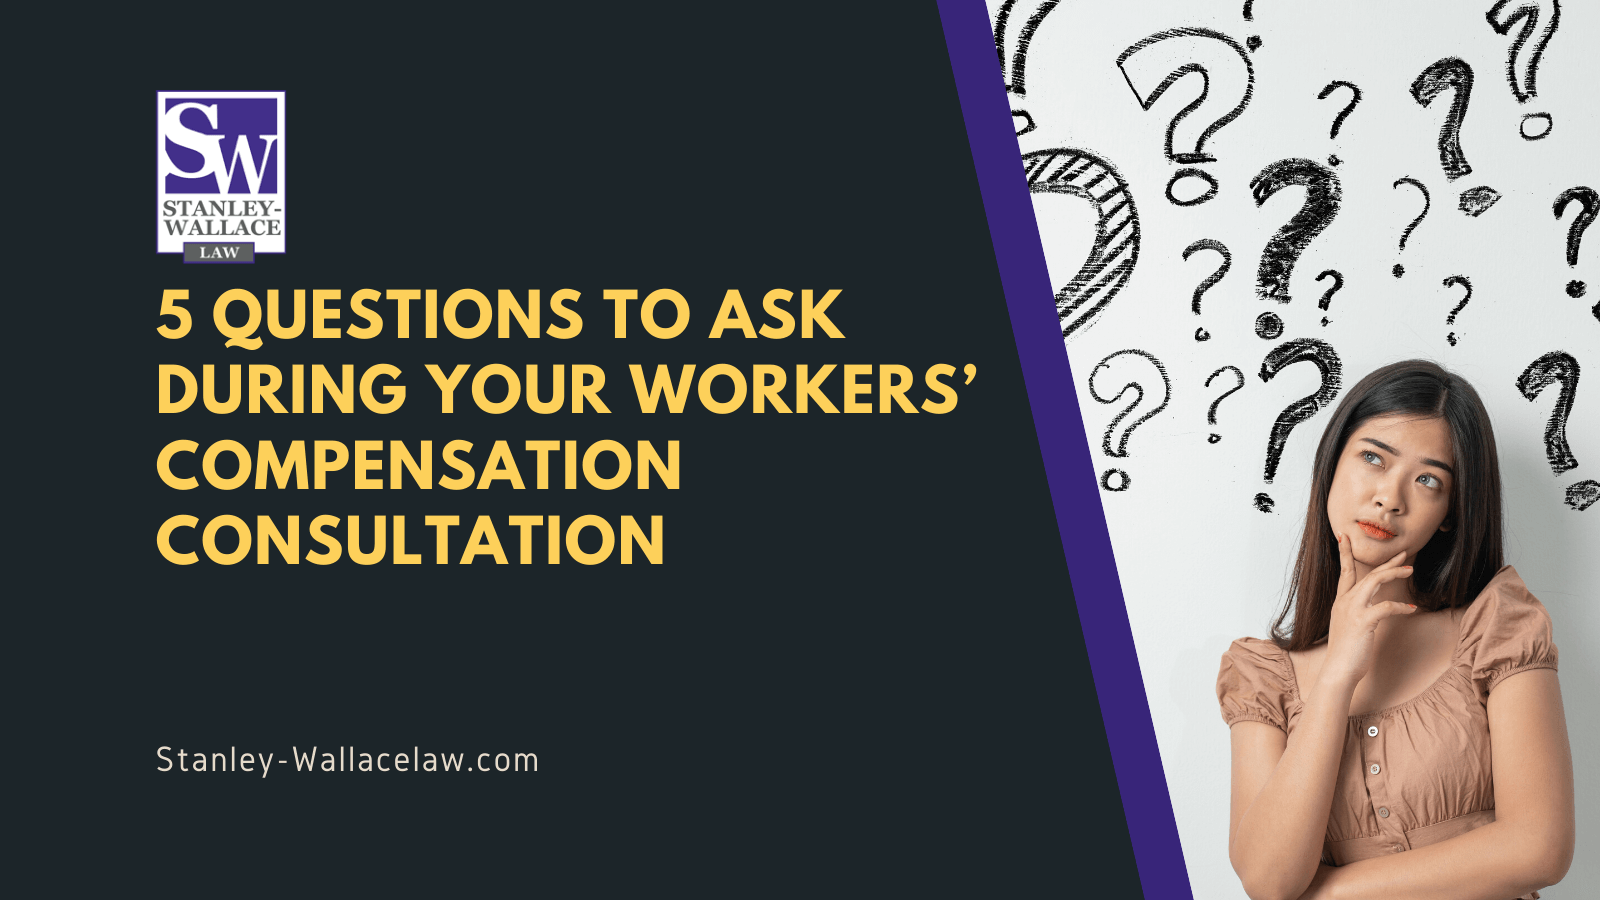 5 QUESTIONS TO ASK DURING YOUR WORKERS’ COMPENSATION CONSULTATION - Stanley-Wallace Law - slidell louisiana